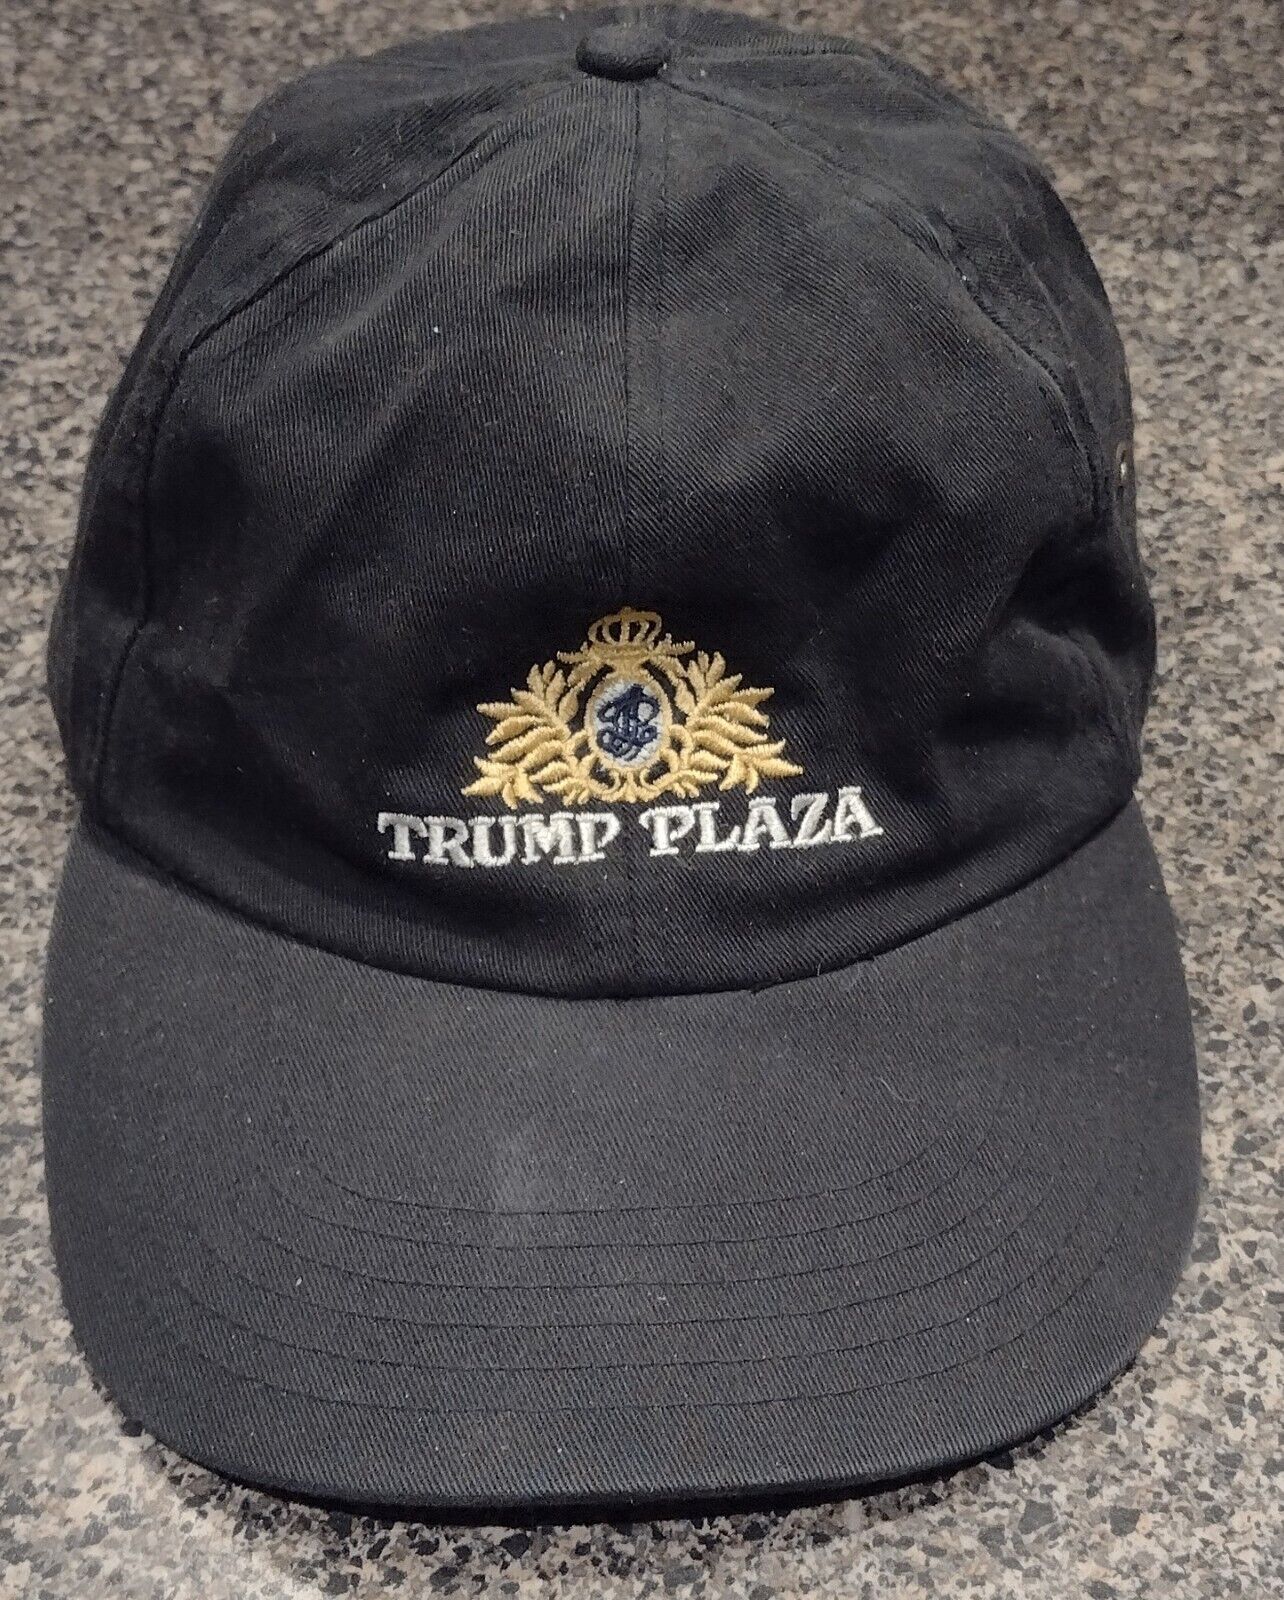 Vintage. Trump Plaza Hat from the Trump Plaza Hotel New York.